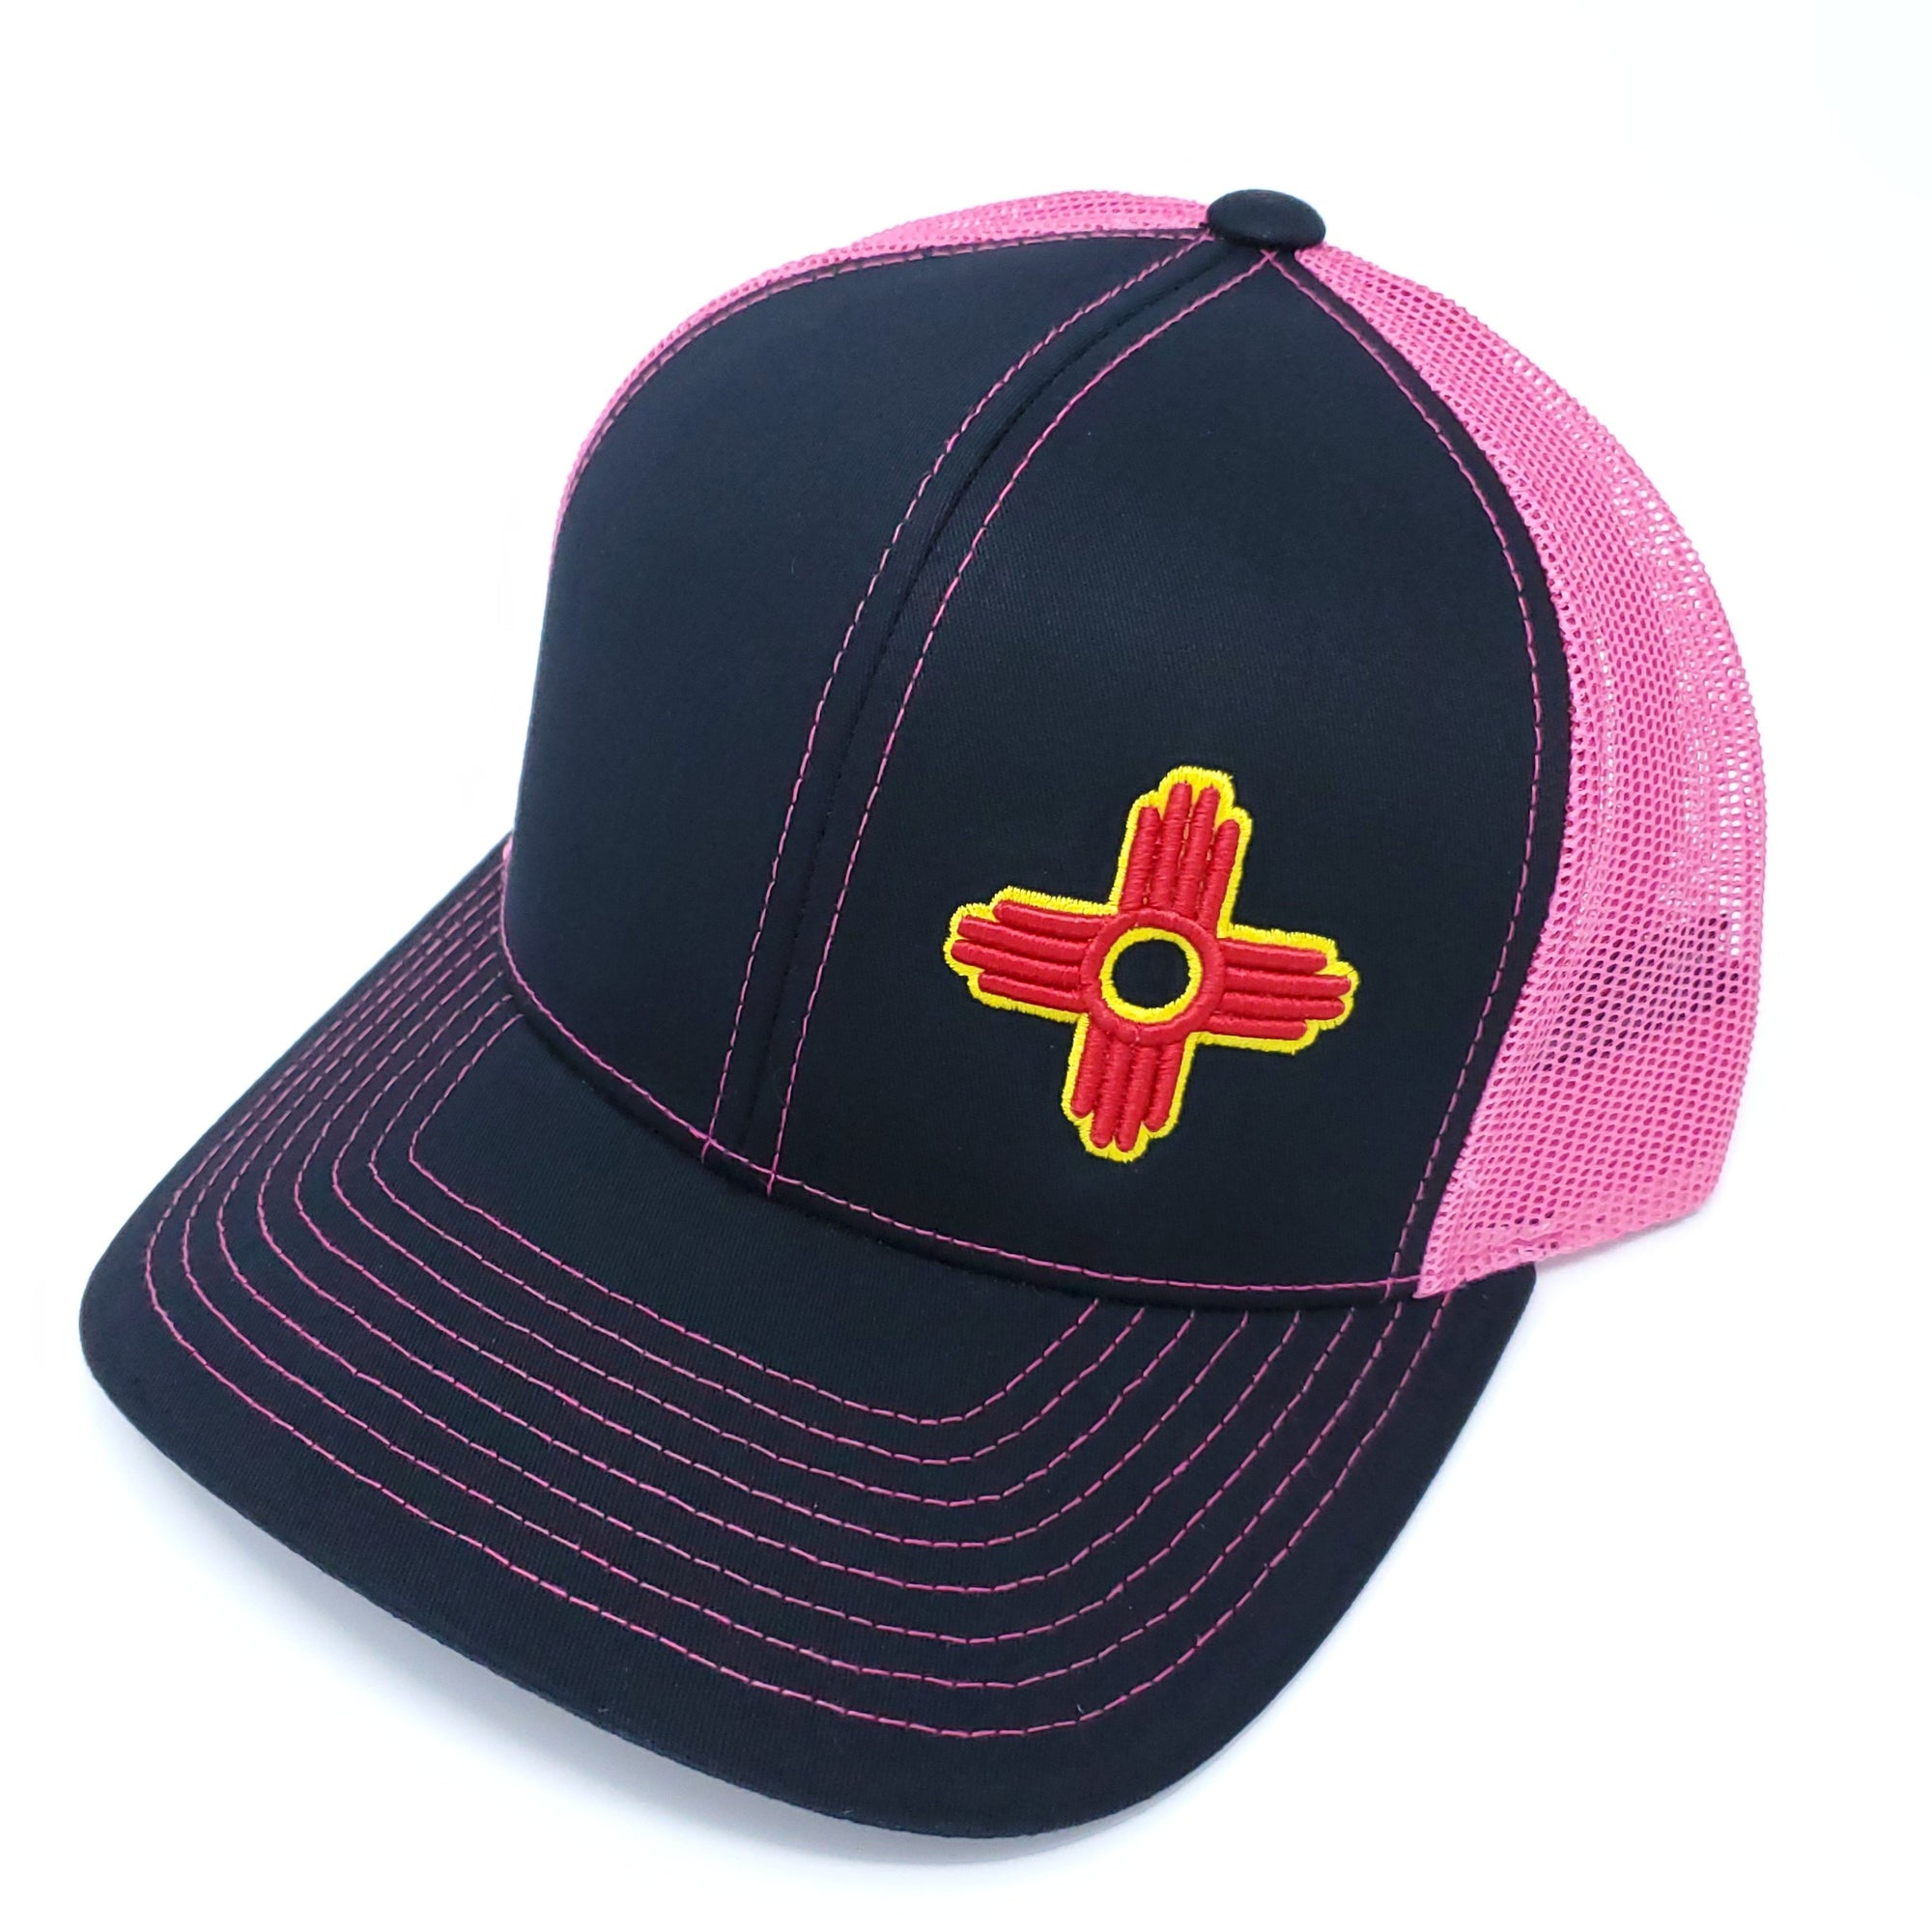 Neon Pink Trucker Style Snapback with Embroidered Zia Symbol - Ragged Apparel Screen Printing and Signs - www.nmshirts.com